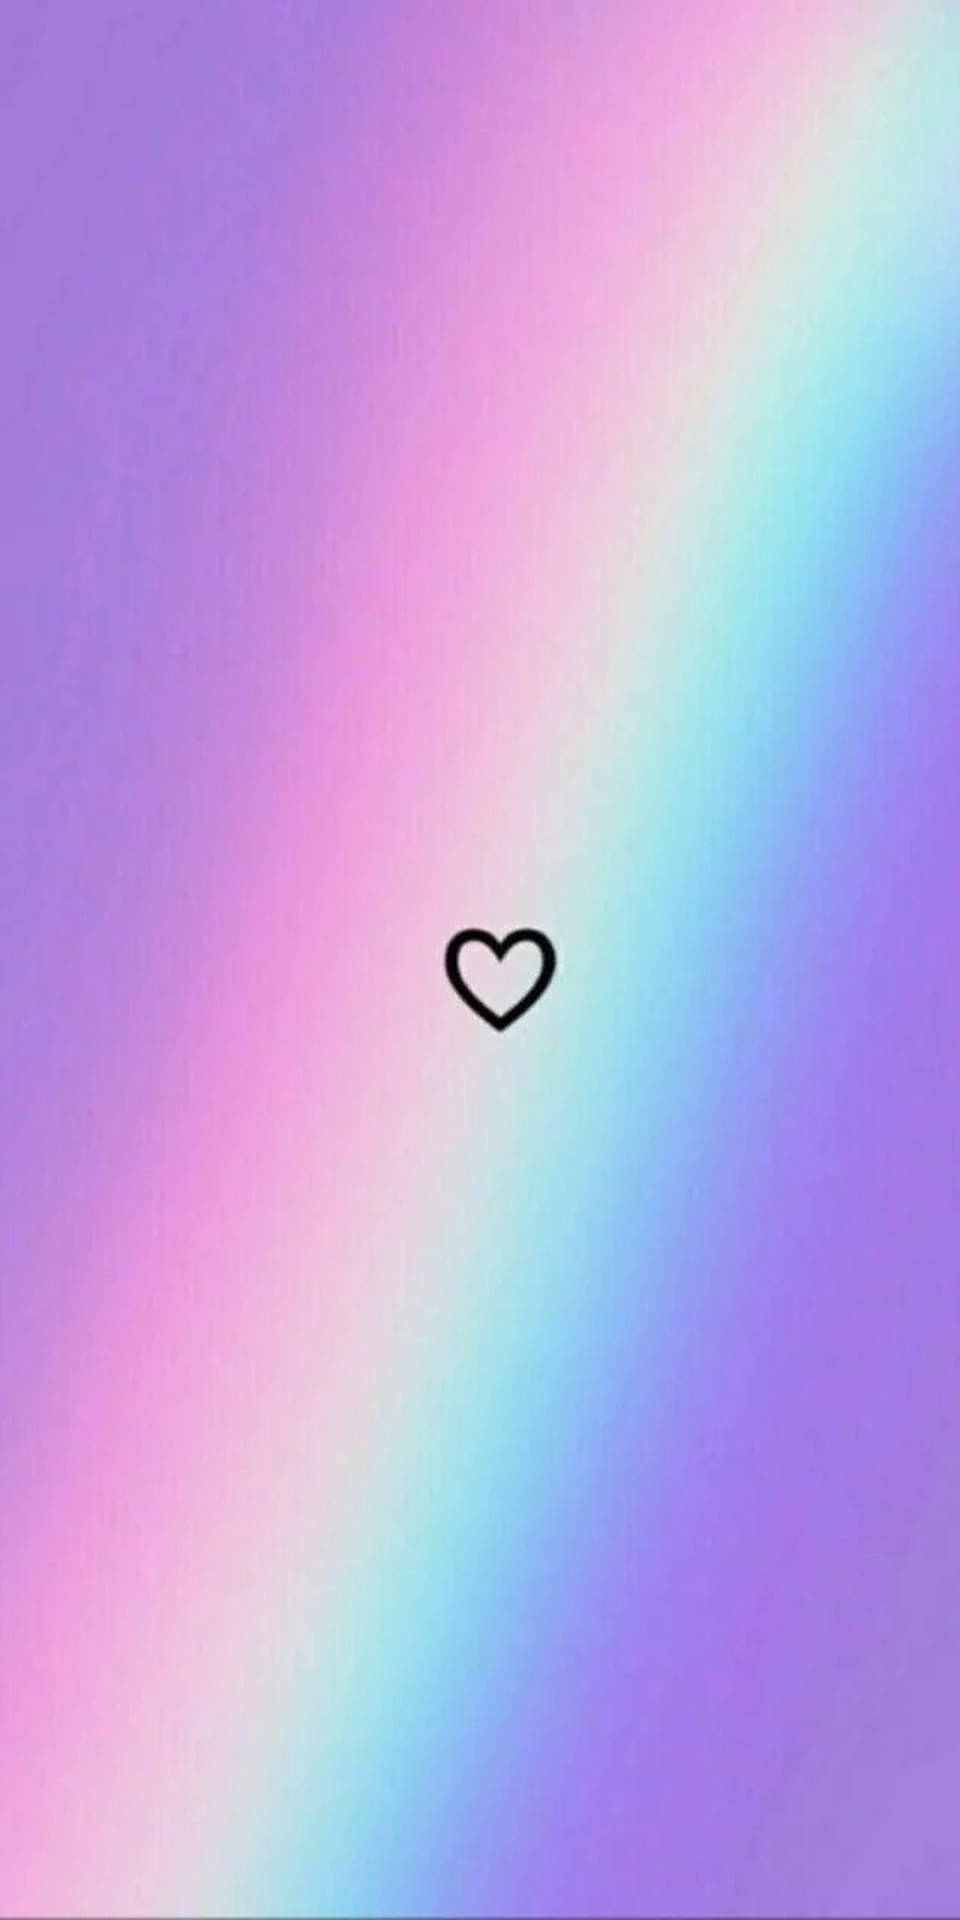 Aesthetic Purple Pastel Rainbow With Heart Background